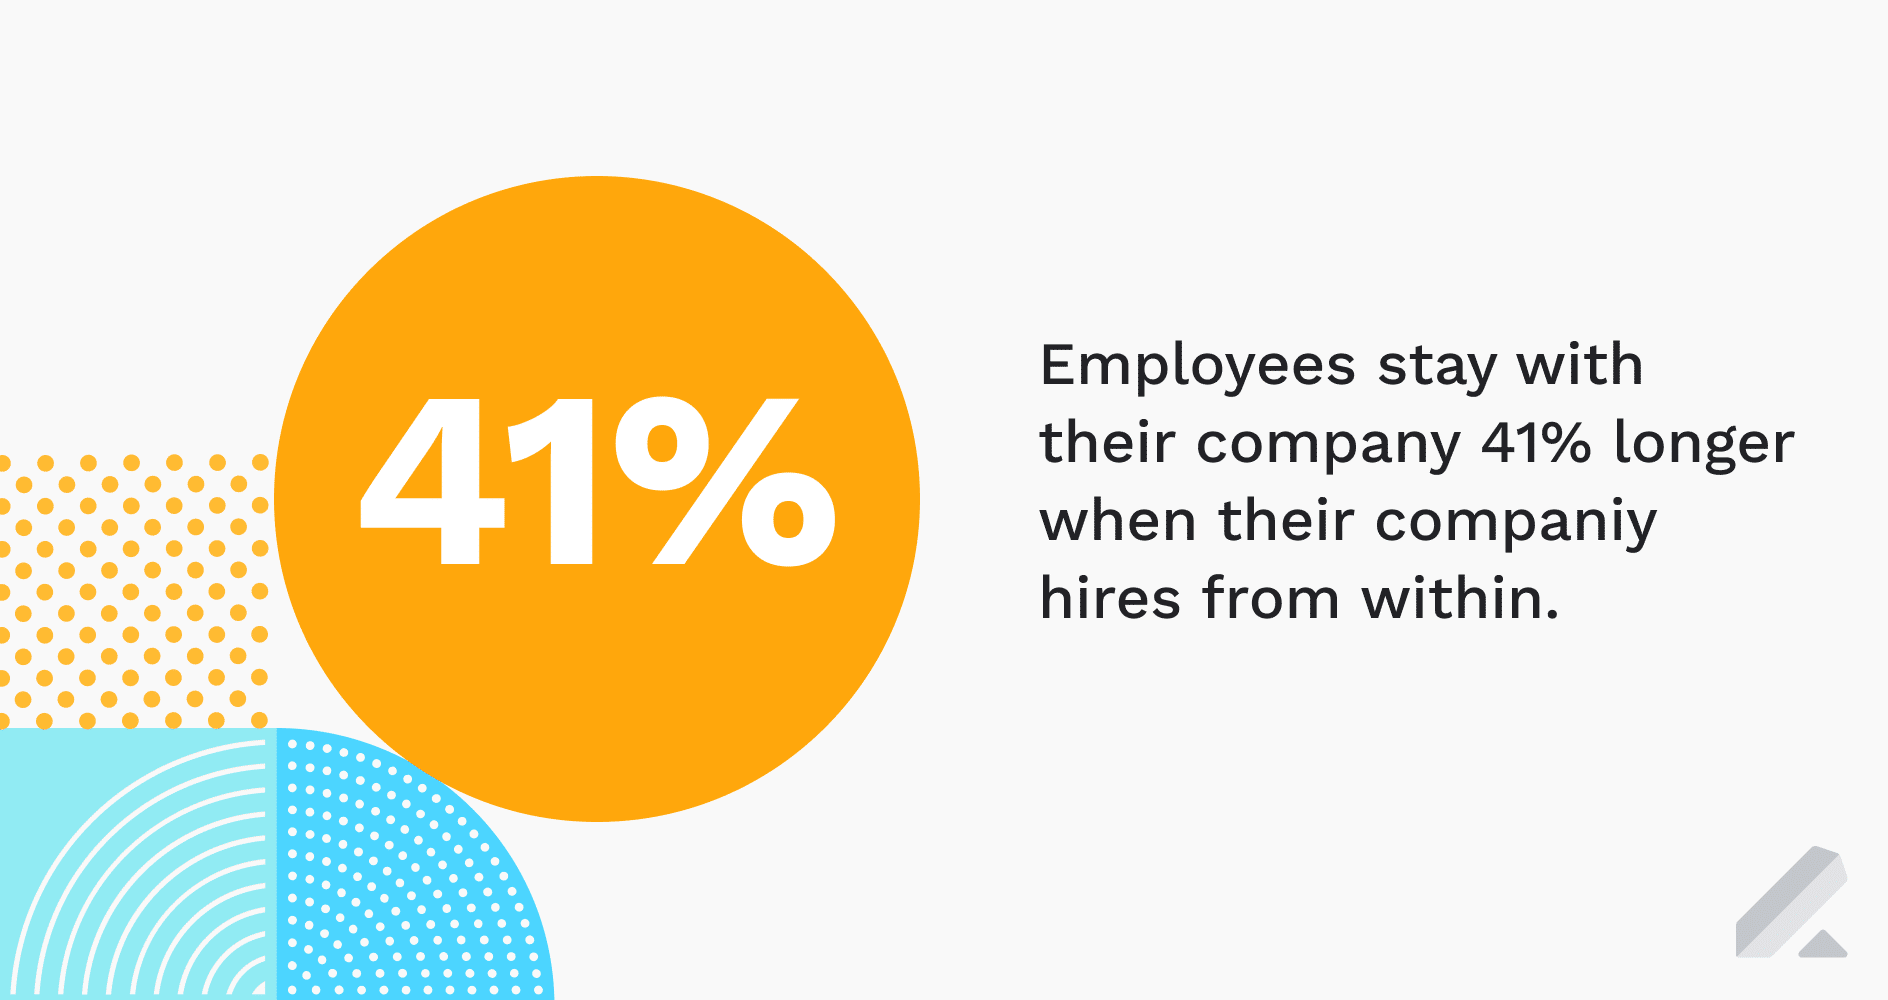 Employees stay with their company 41%